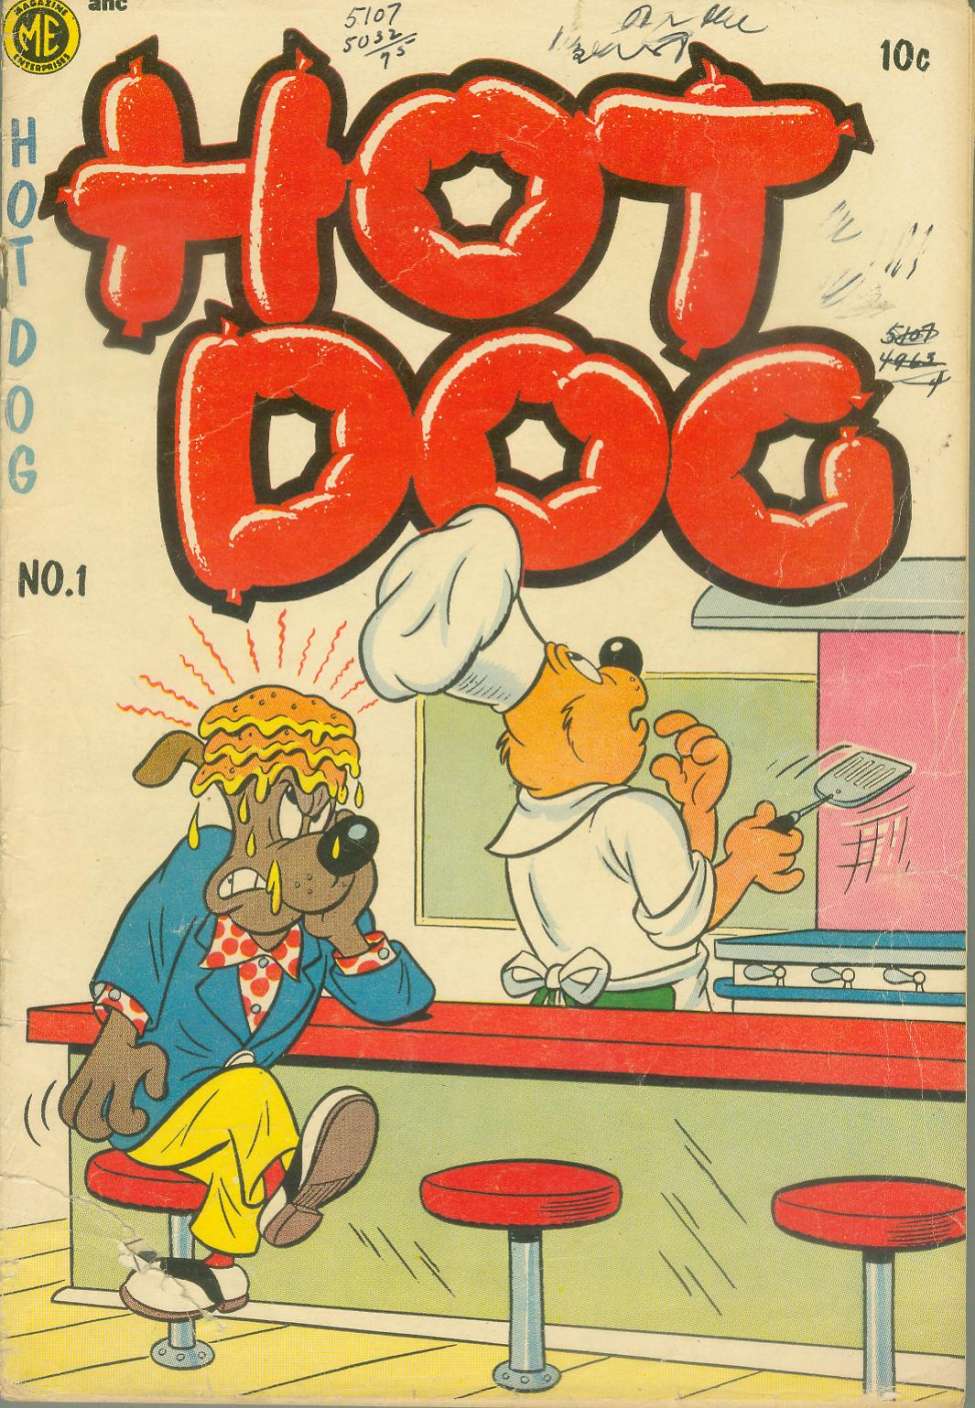 Comic Book Cover For Hot Dog 1 (A-1 107)